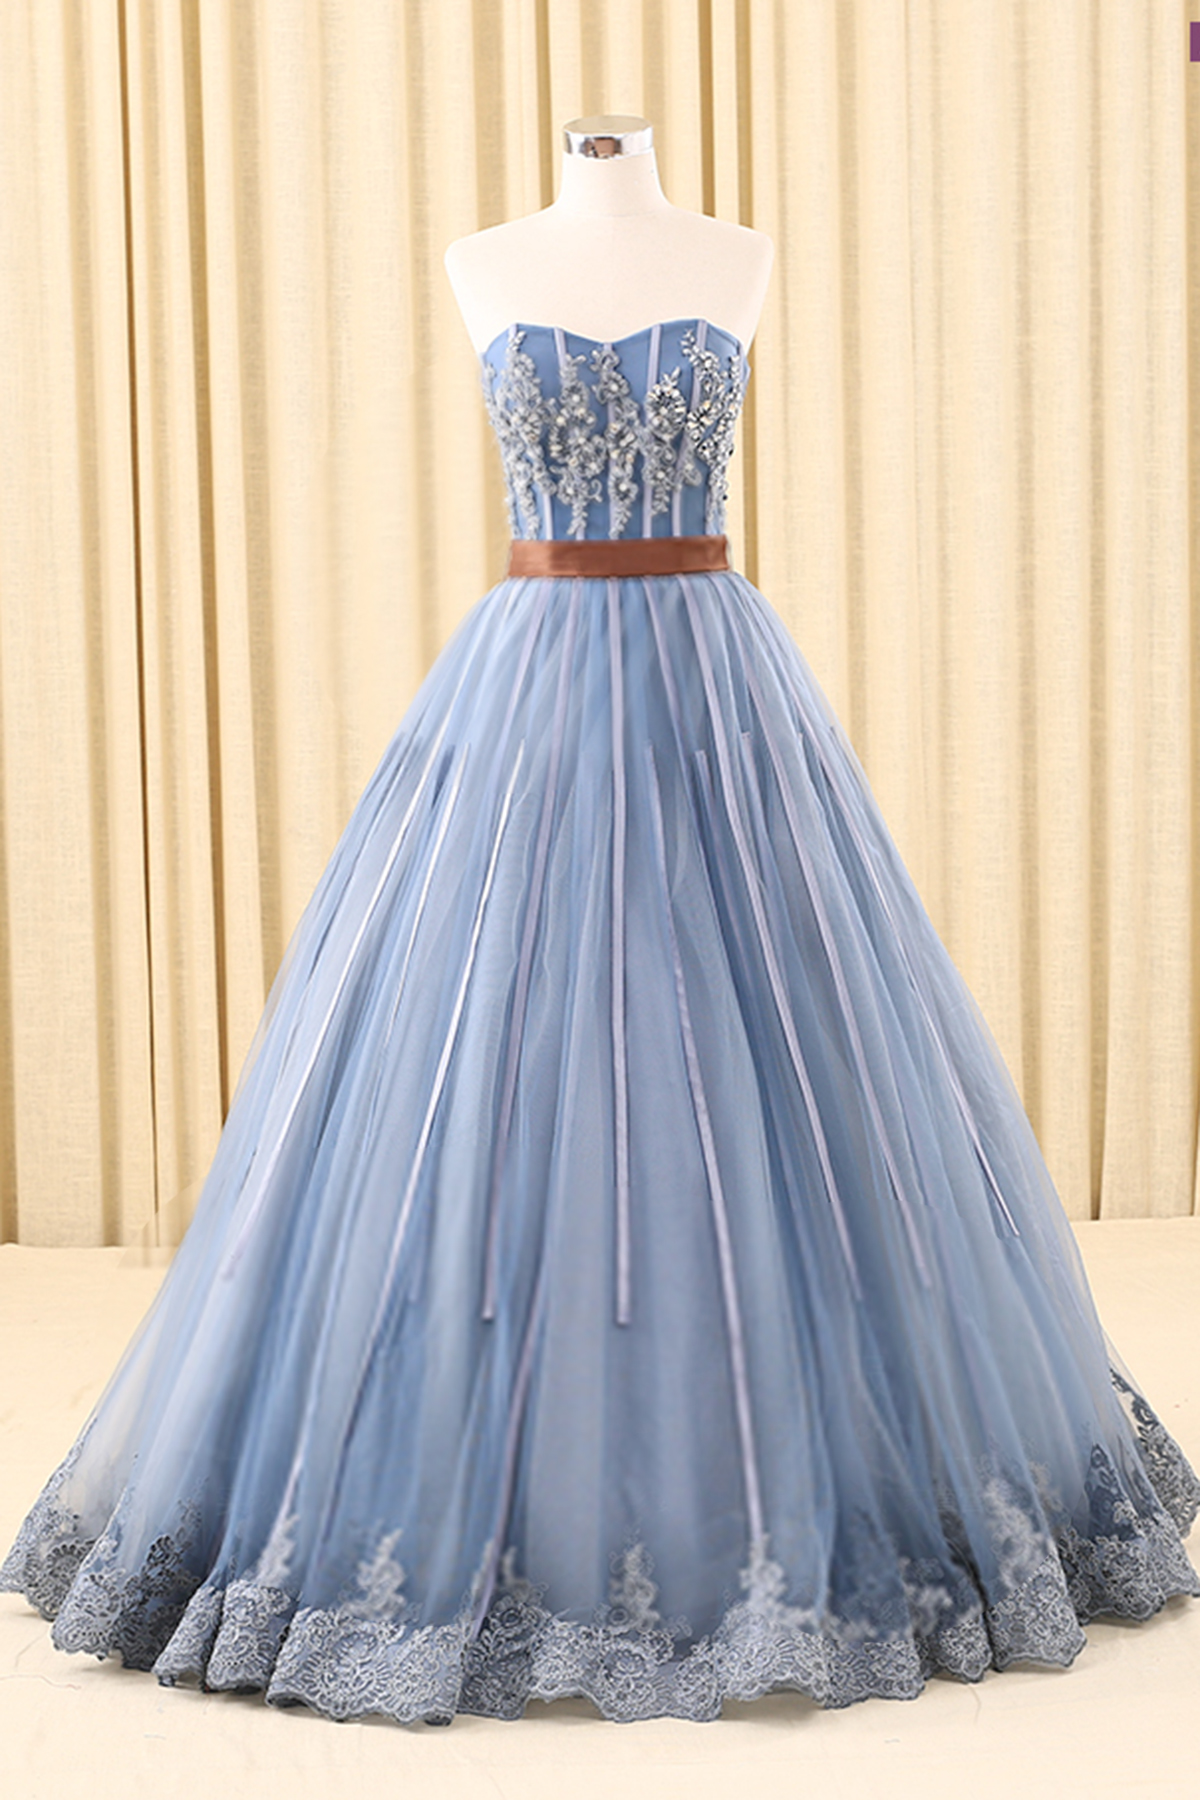 Prom Dresses, Fashion Prom Dresses,blue Sweetheart Neckline Long Tulle Prom Dress With Beading,pd14165